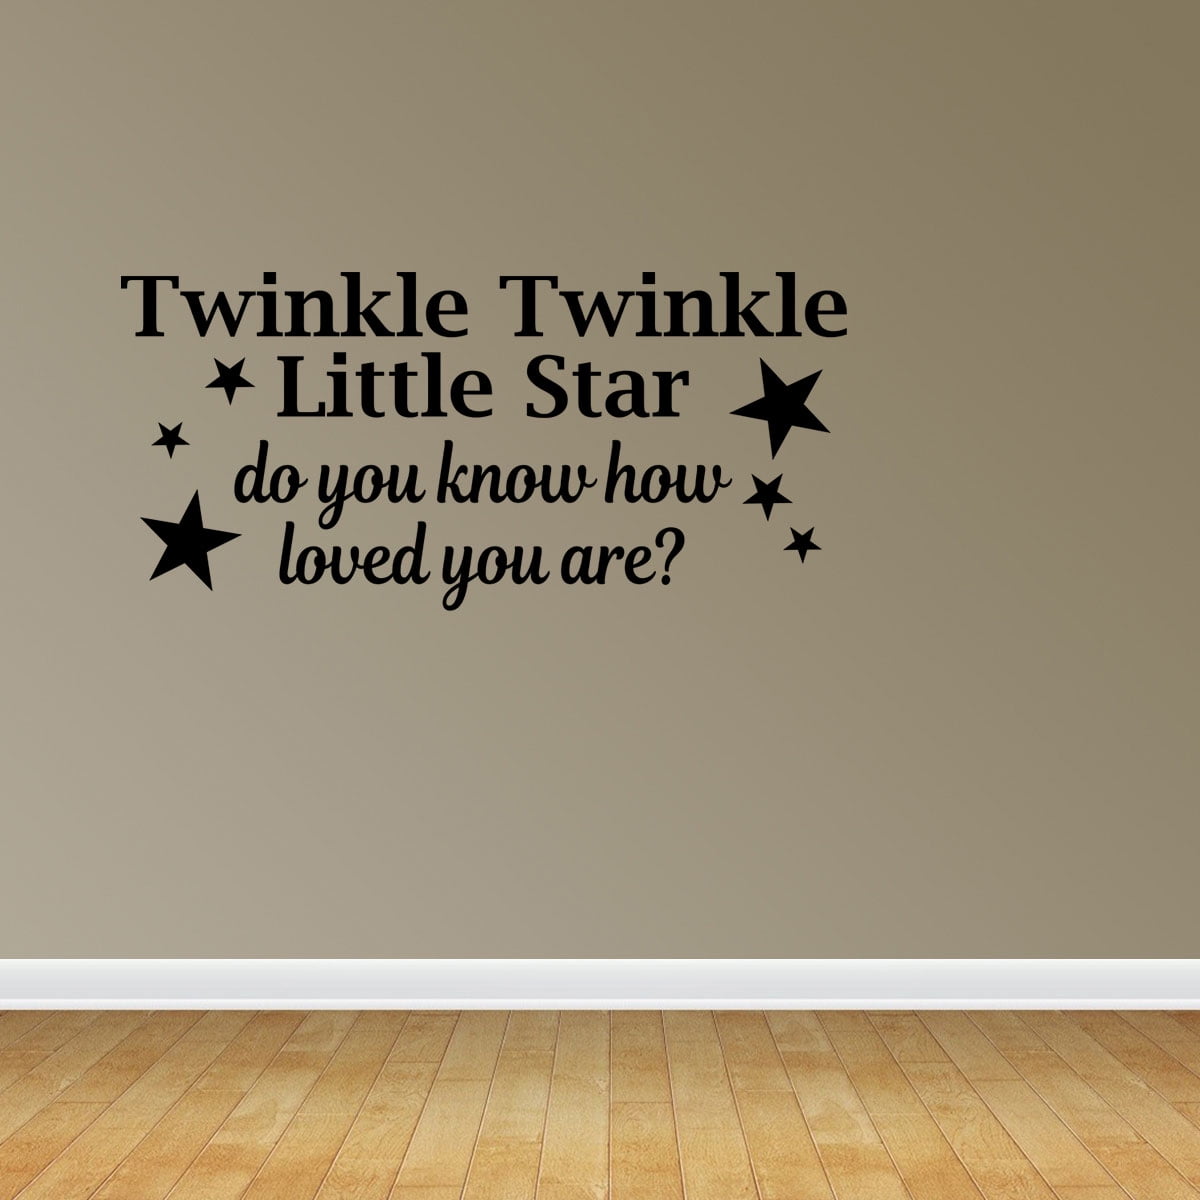 Removable Twinkle Little Star Letters Wall Sticker Decor Decal Black 